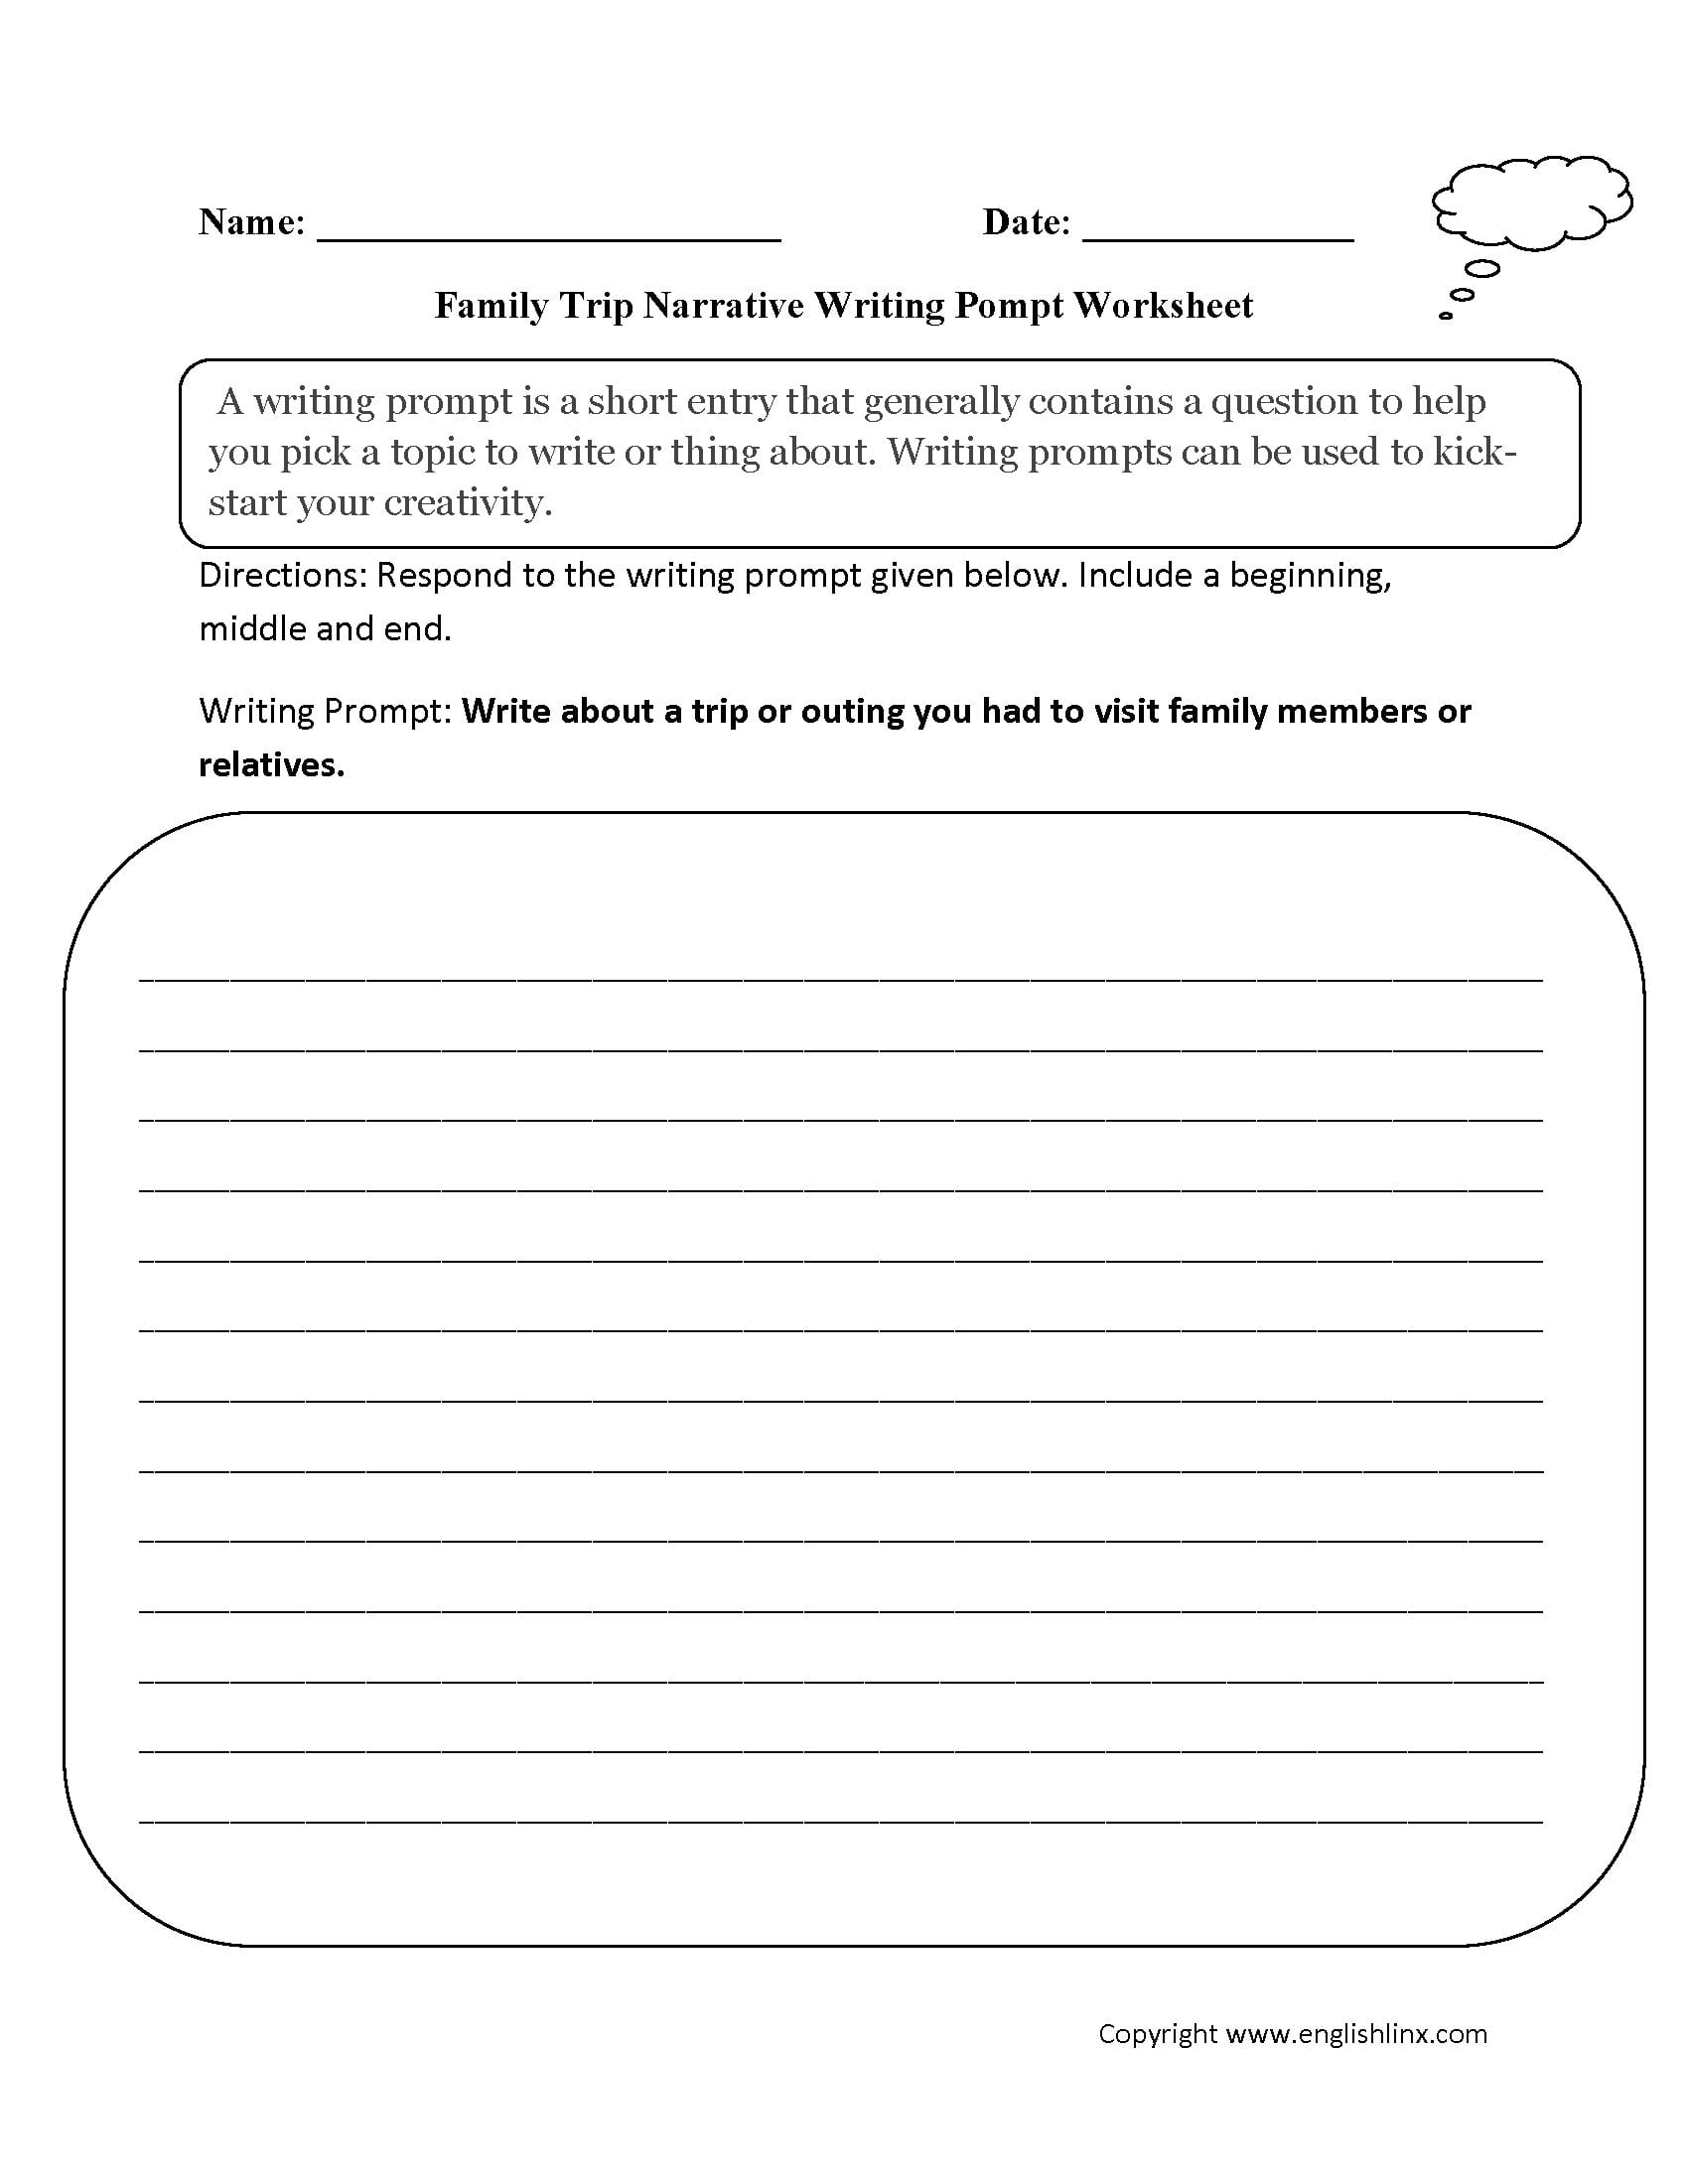 Englishlinx  Writing Prompts Worksheets As Well As Writing Prompt Worksheets